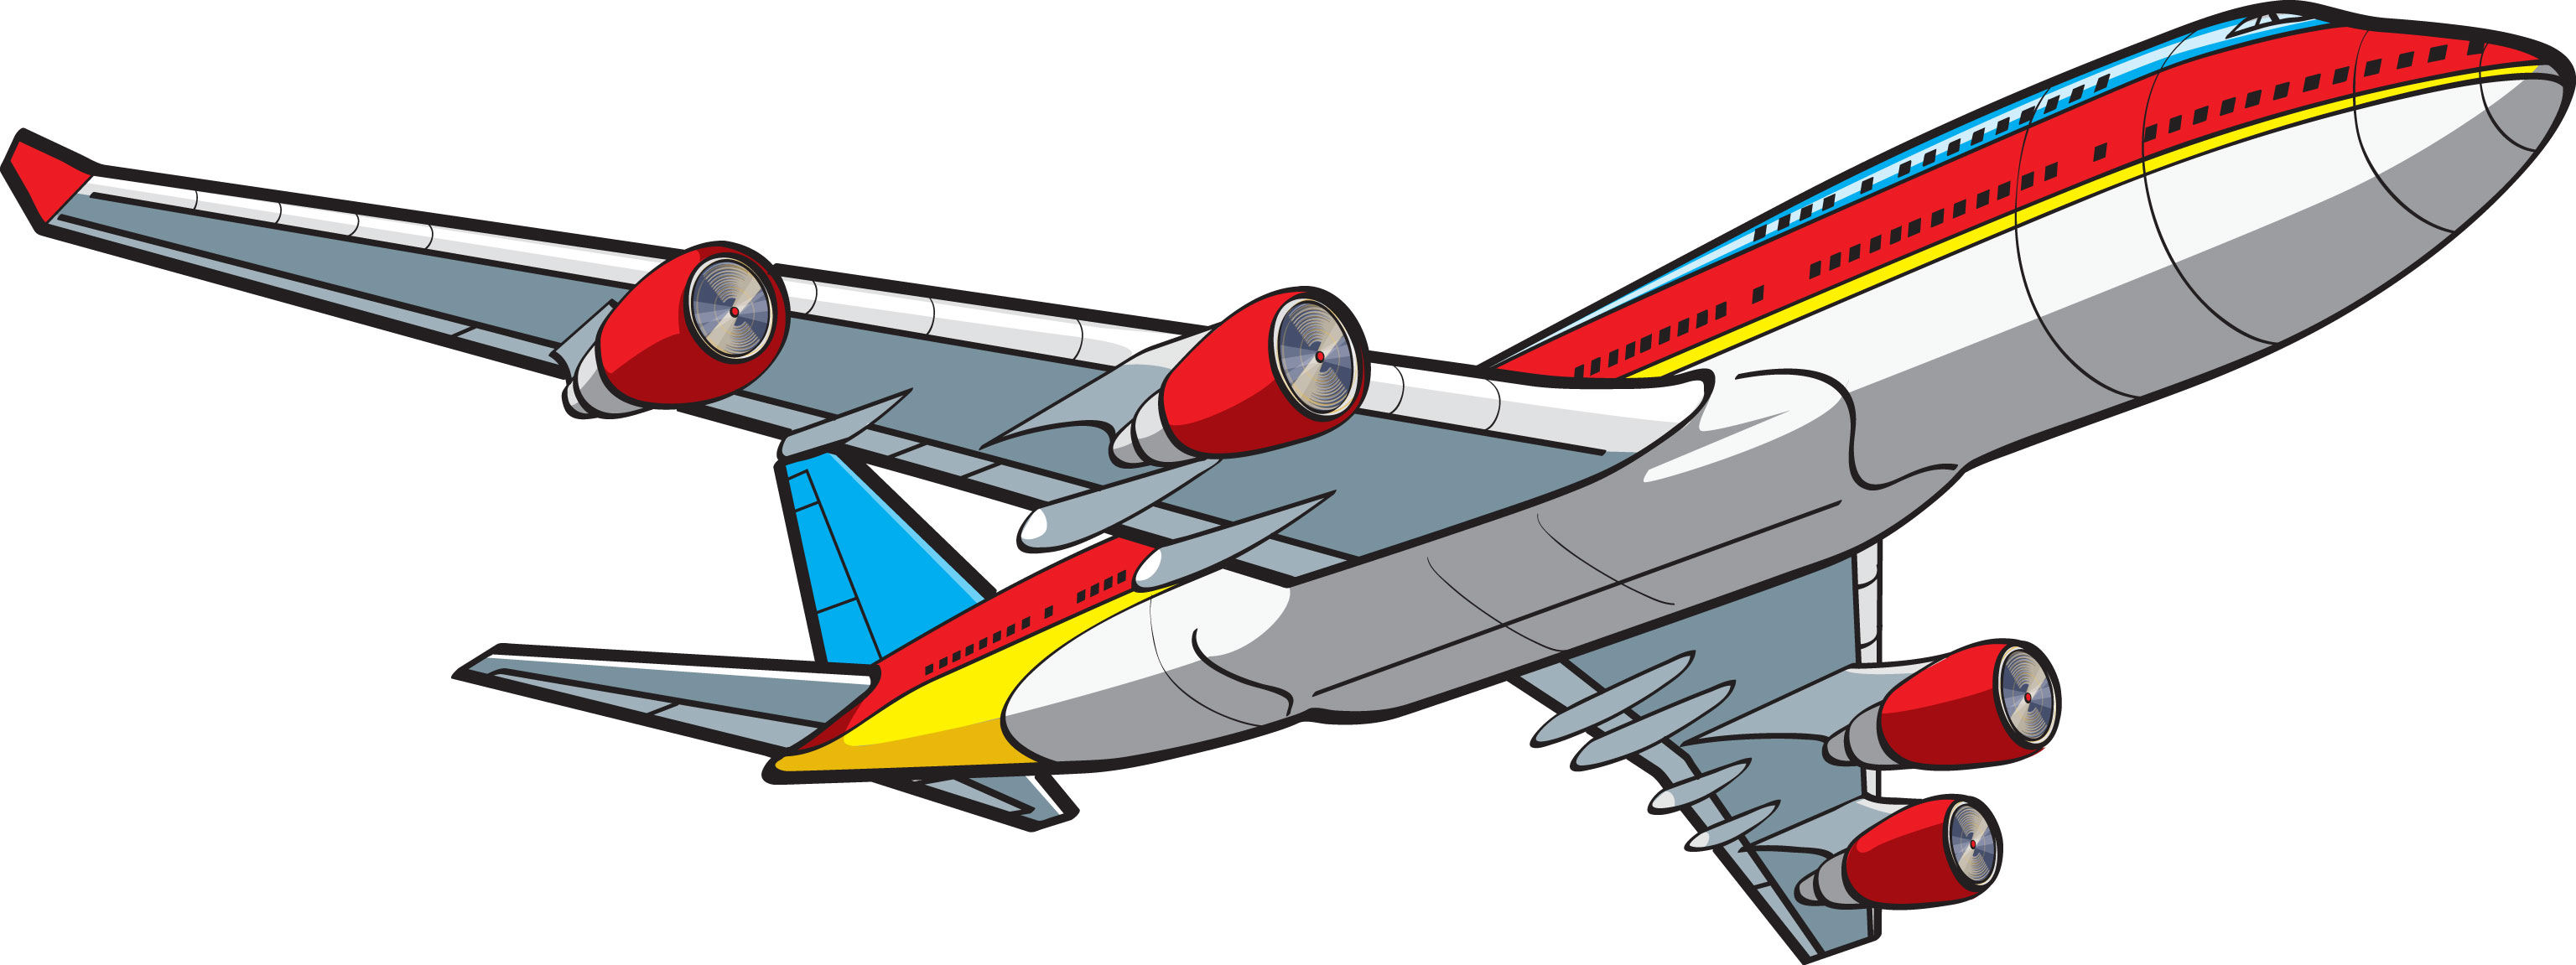 Jet Airplane Clipart   Cliparthut   Free Clipart